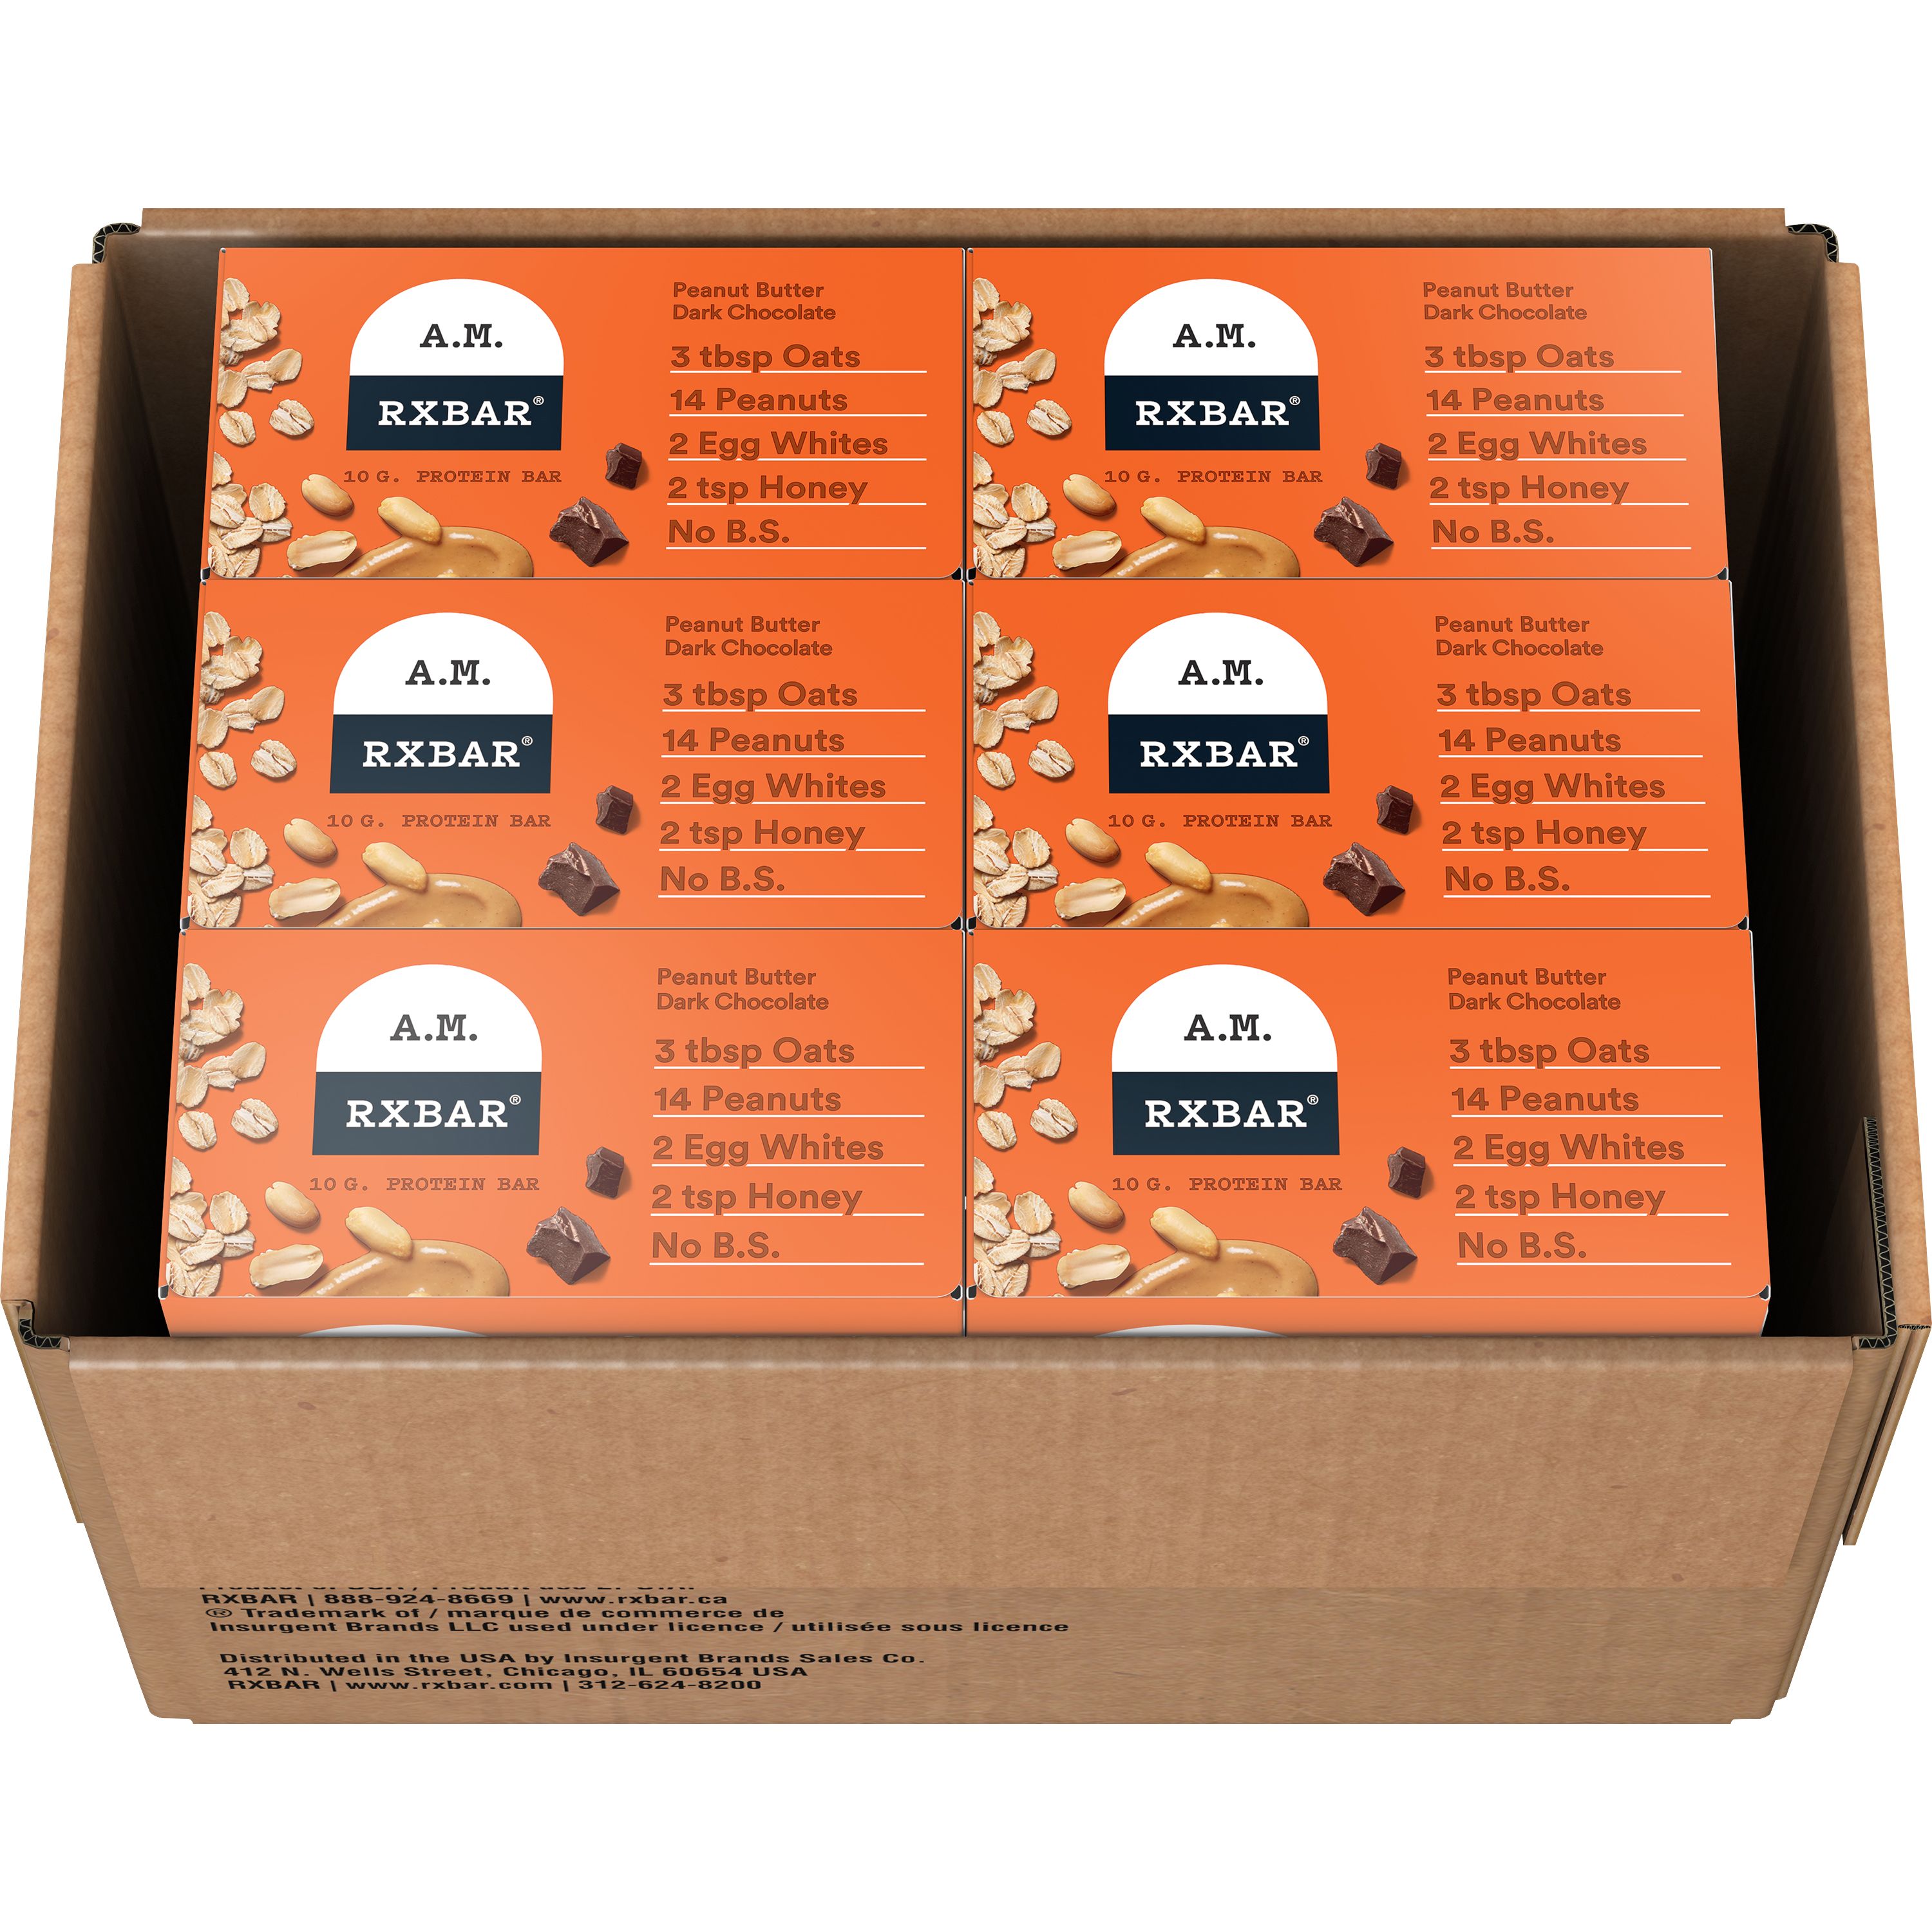 RXBAR A.M. Protein Bars Peanut Butter Dark Chocolate product image